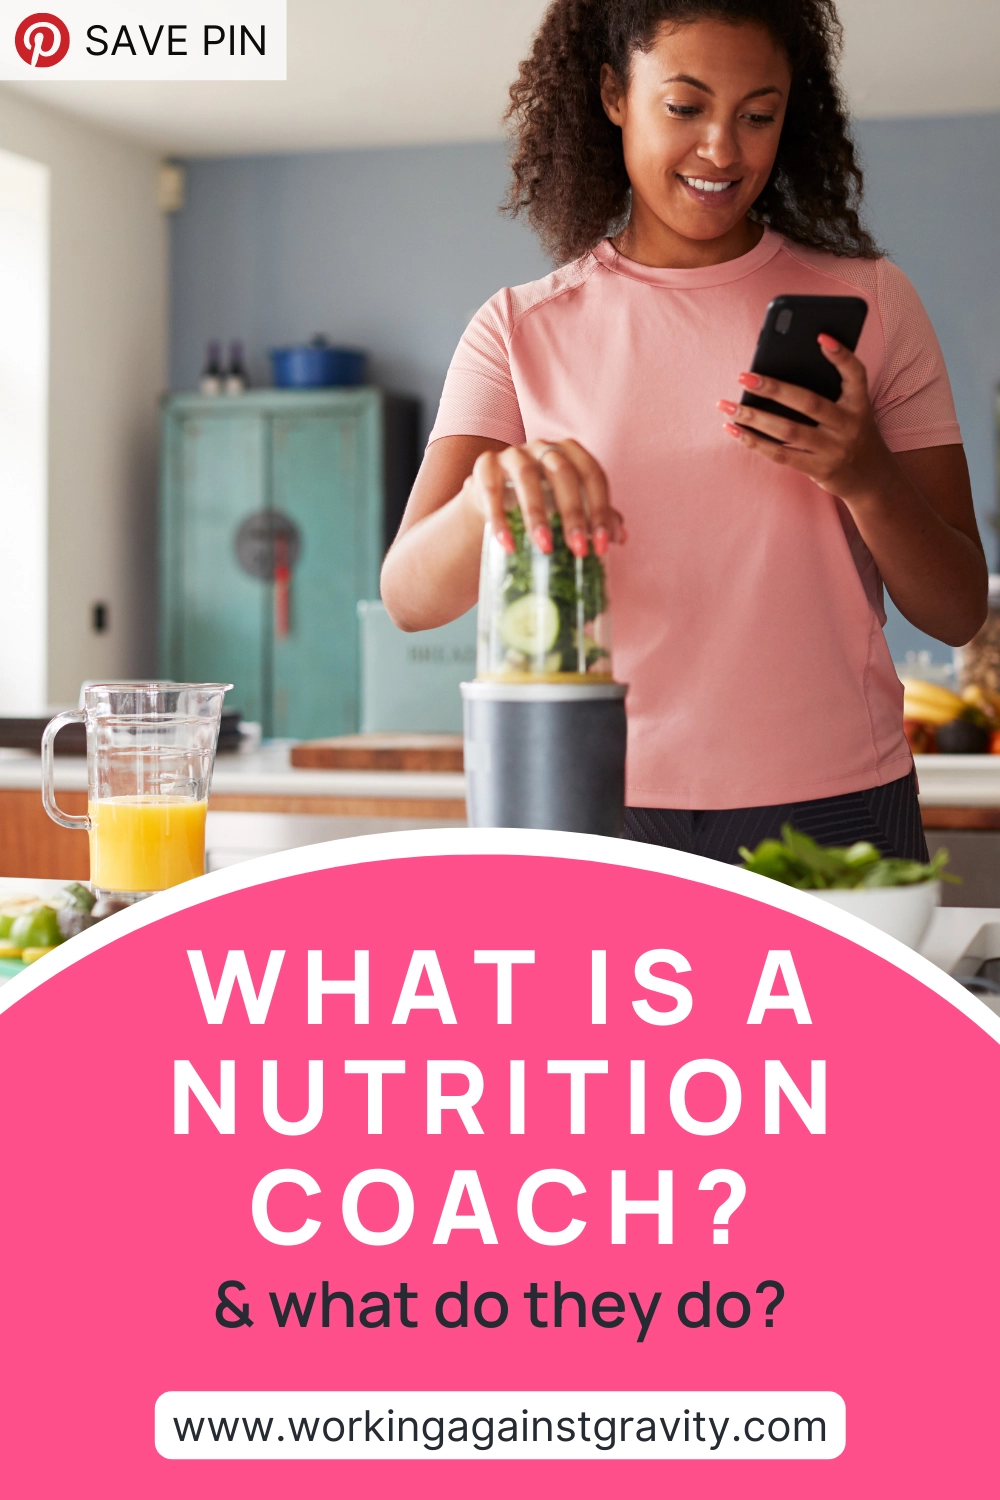 what is a nutrition coach and what do they do?